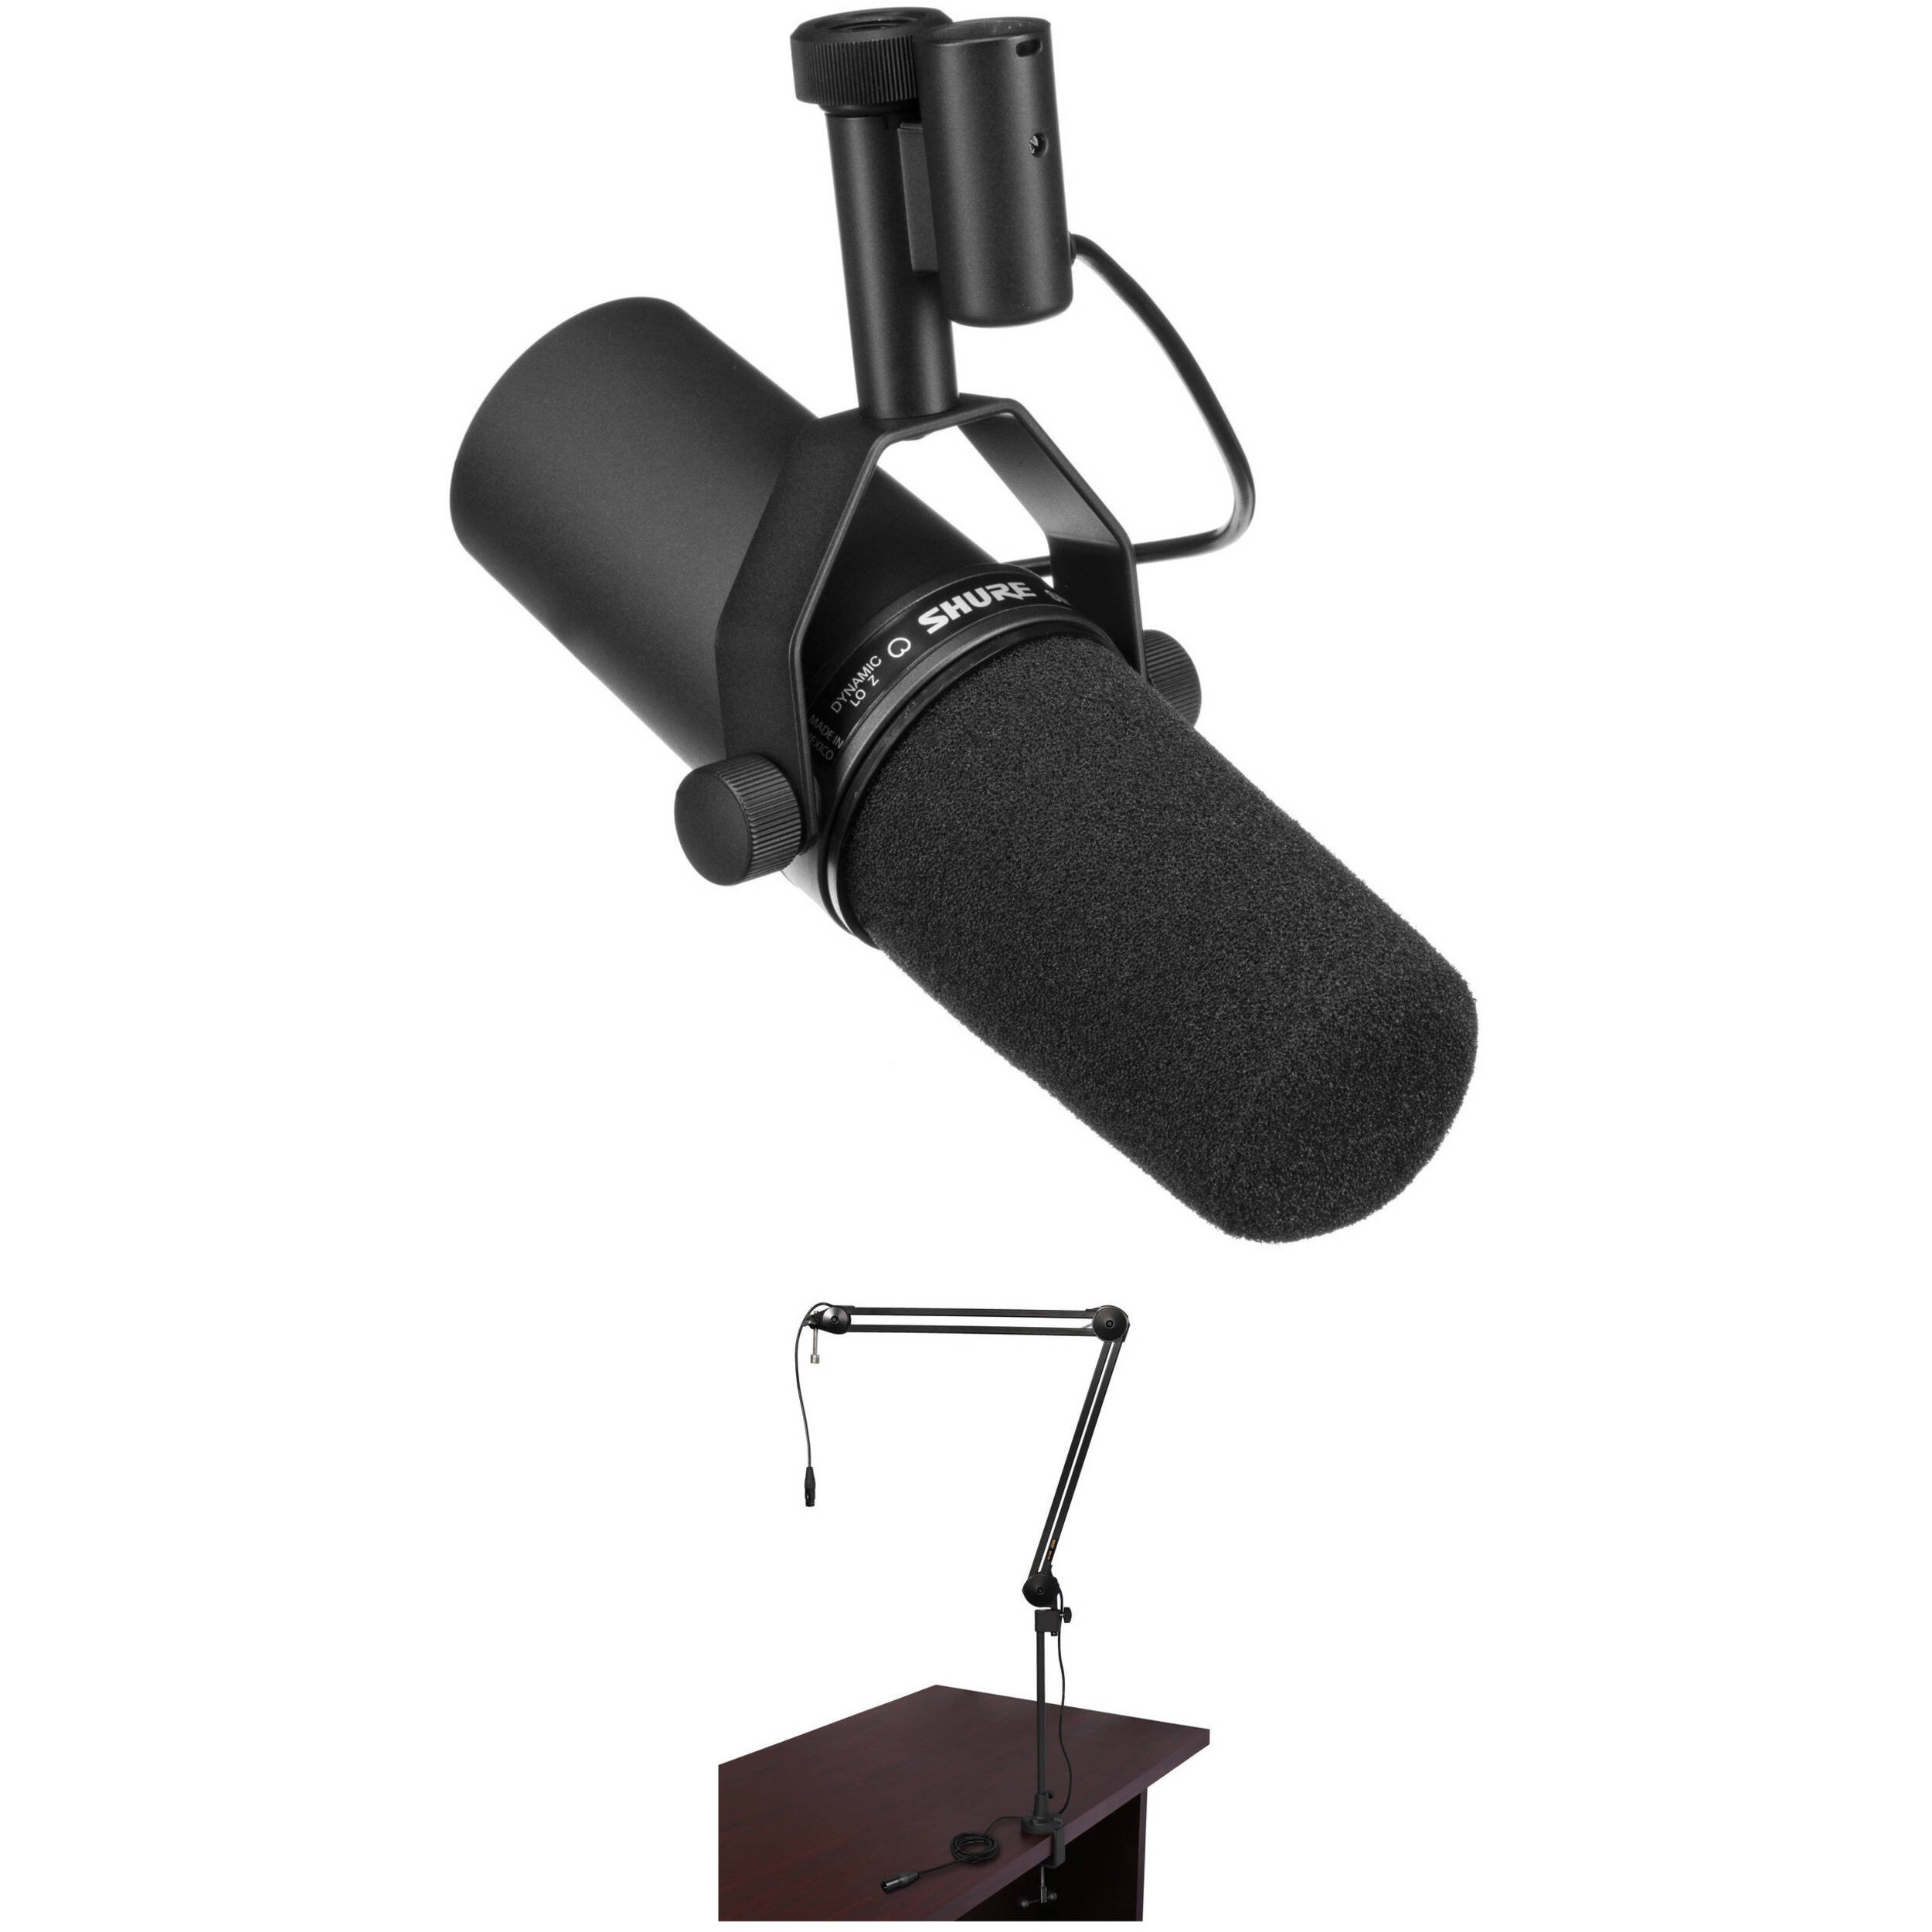 Suspension Boom Scissor Arm Stand For Shure Sm7b Mic With 2 Types Windscreen Youshares Shure Sm7b